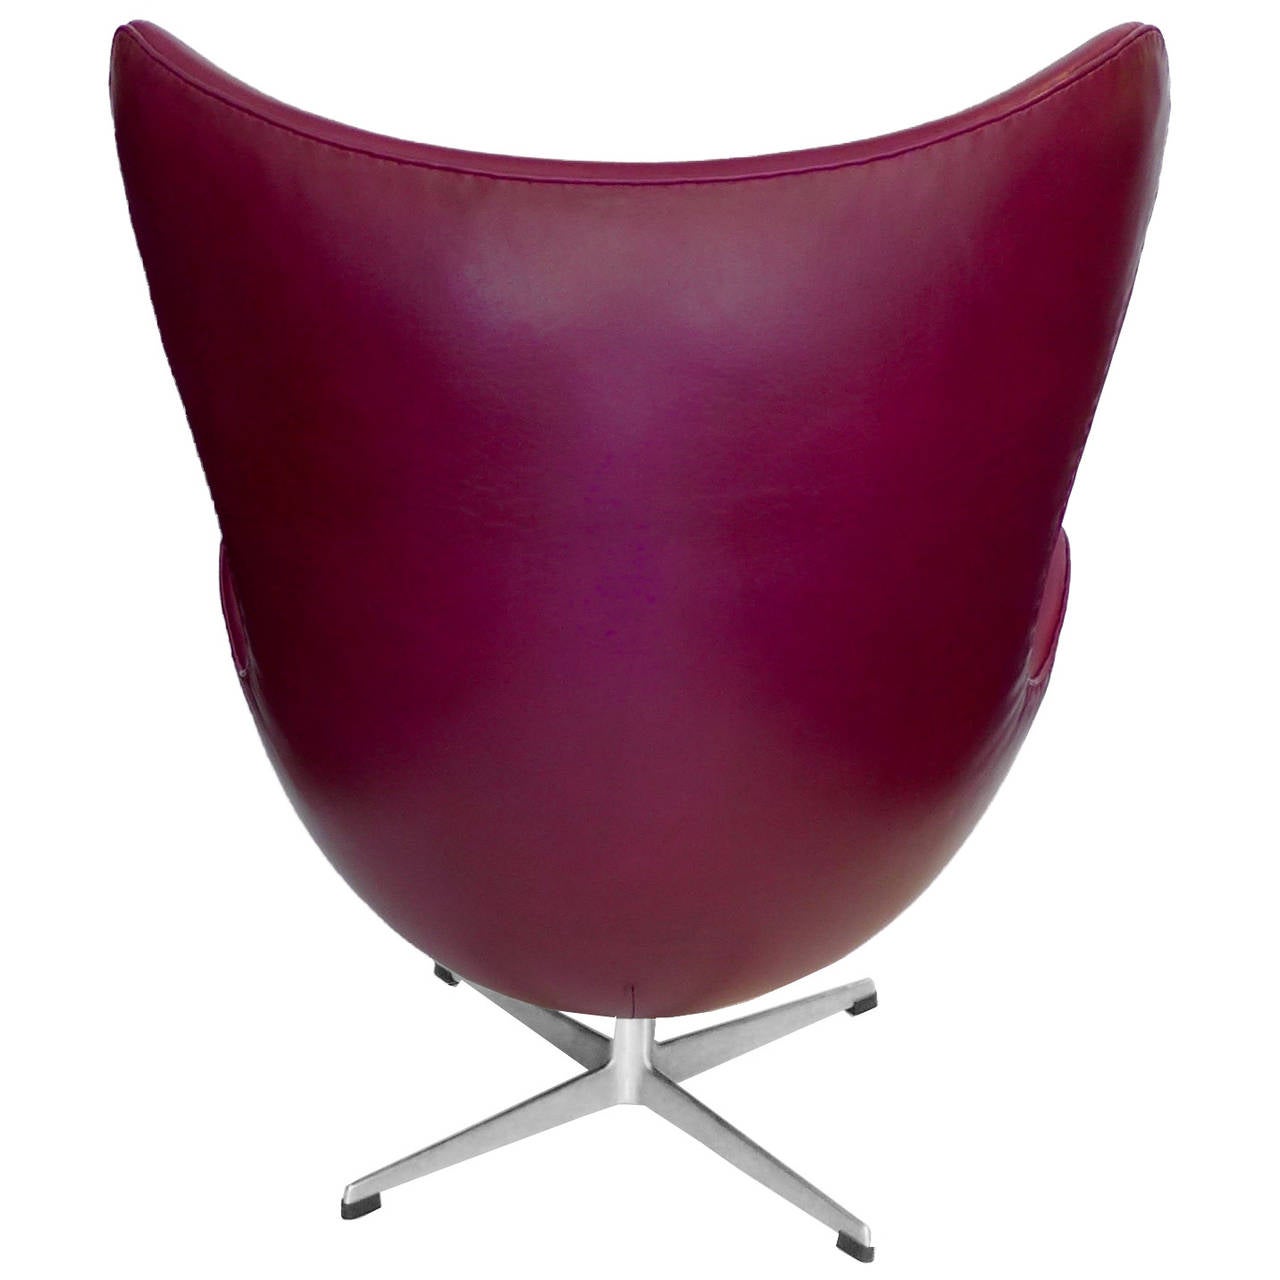 Anodized Pair of Original Egg Chairs with Ottomans by Arne Jacobsen in Mulberry Leather For Sale